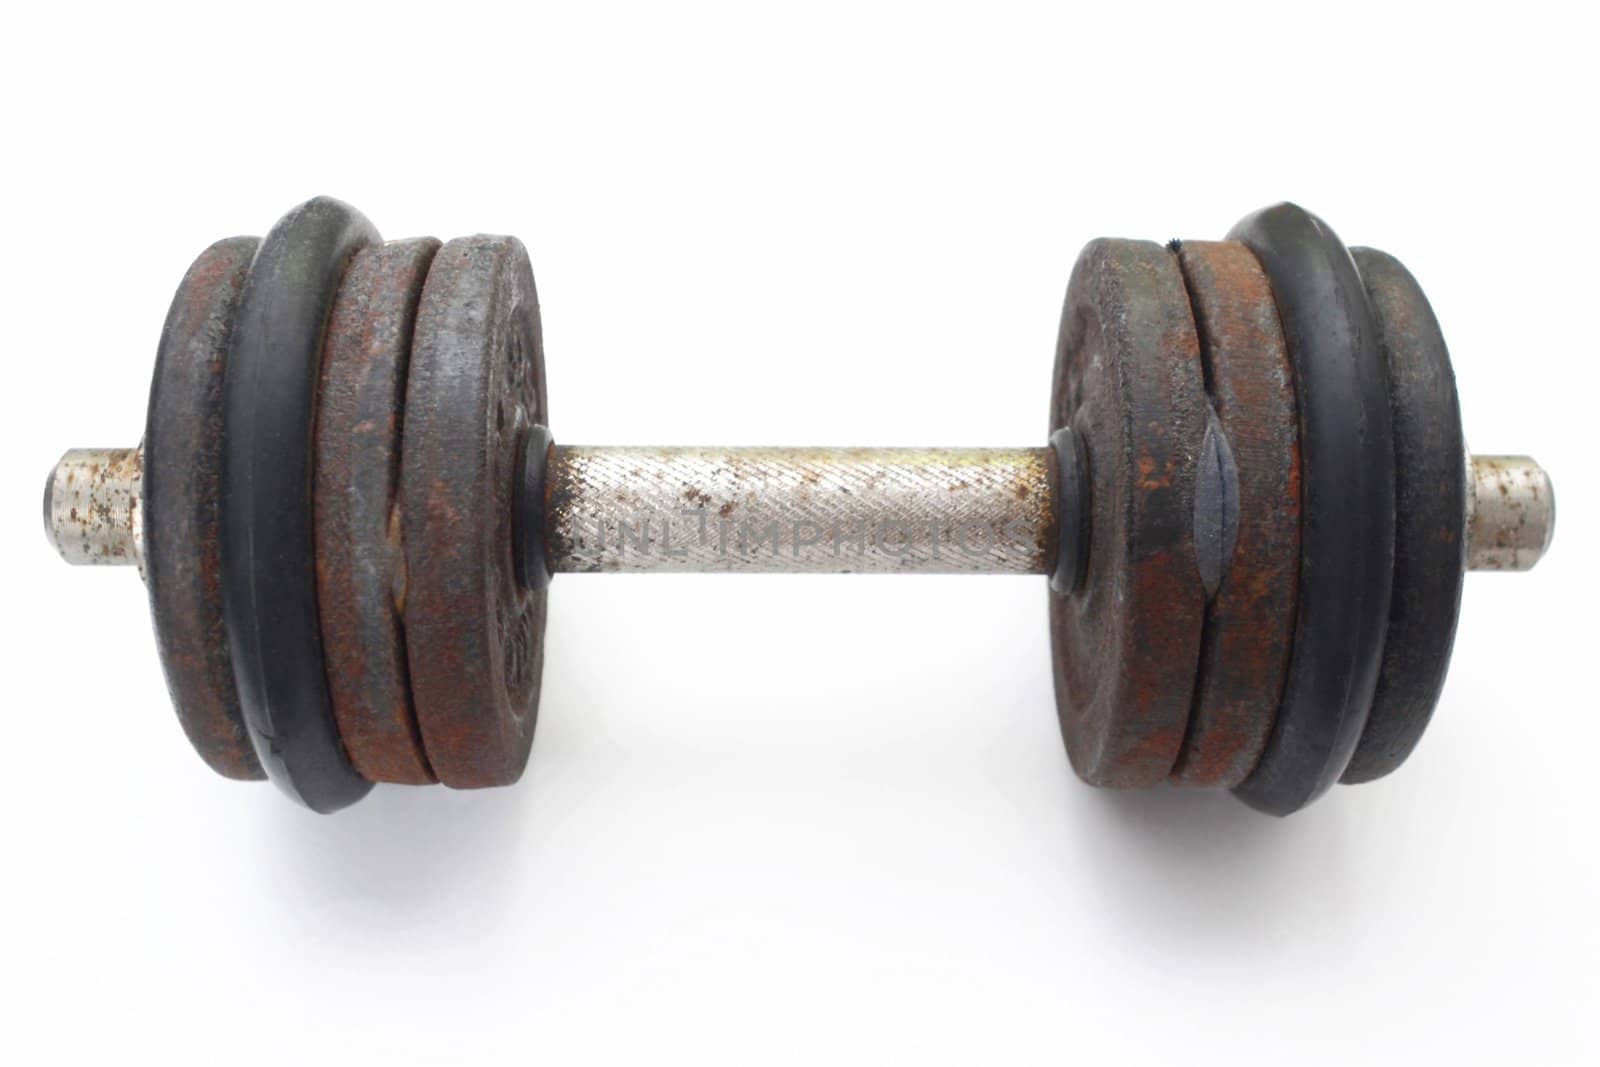 A barbell on the white background